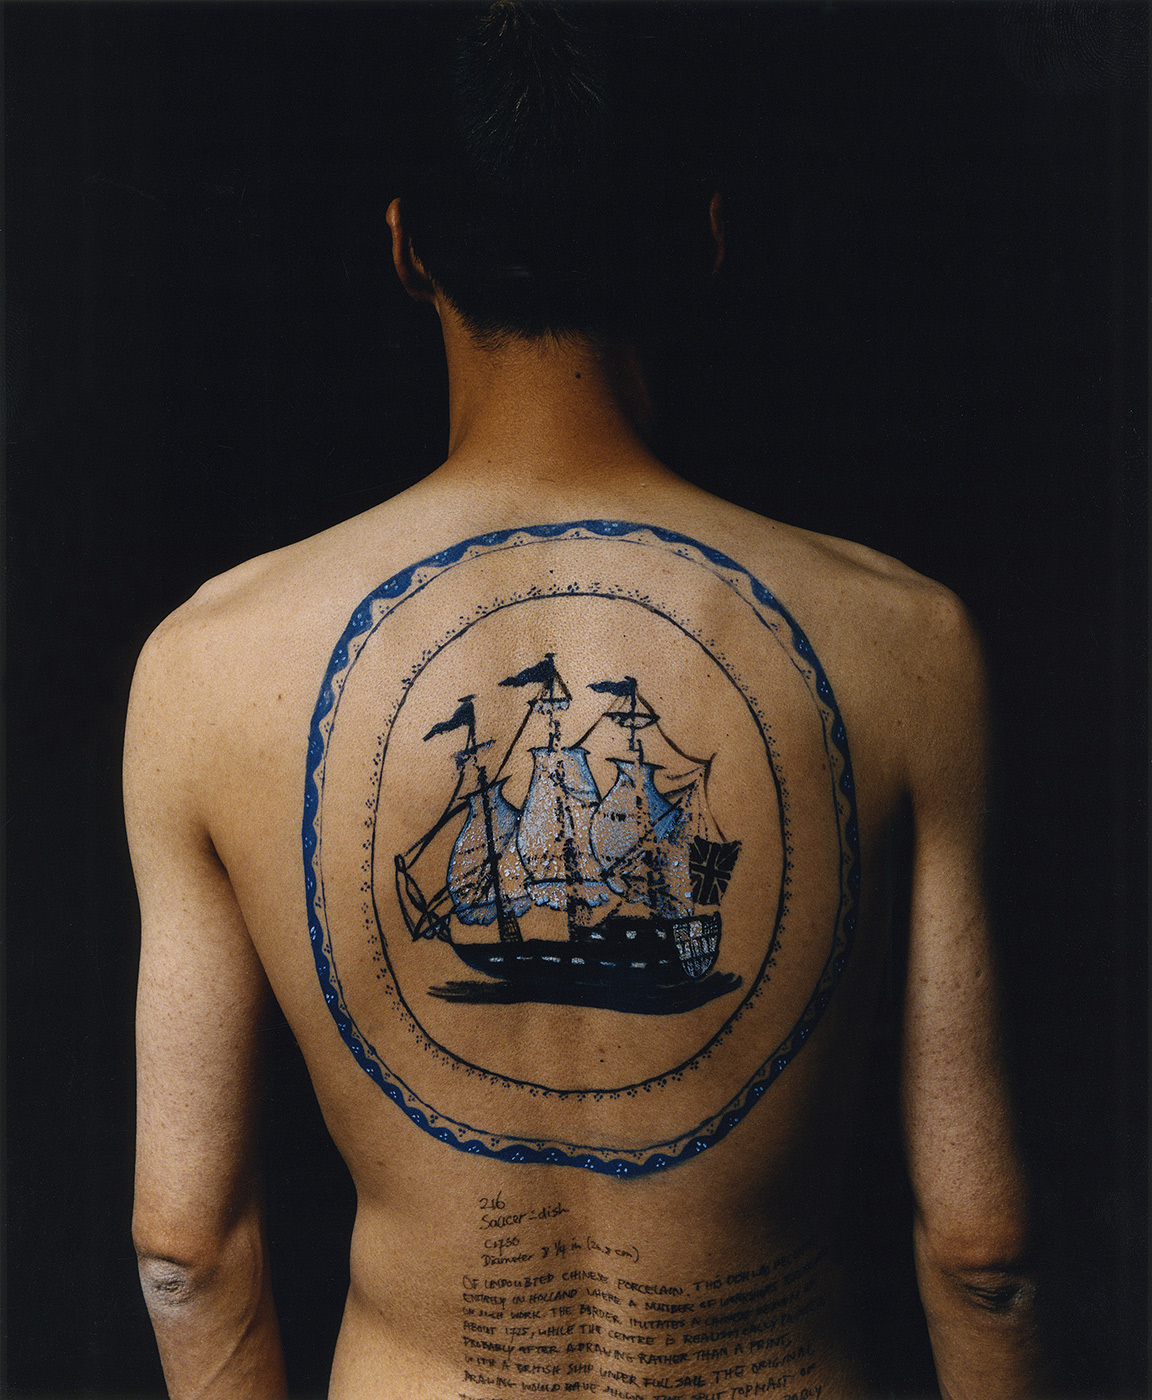 Haifeng Ni - Self-Portrait as Part of the Porcelain Export History 1 - Back, 1999-2001